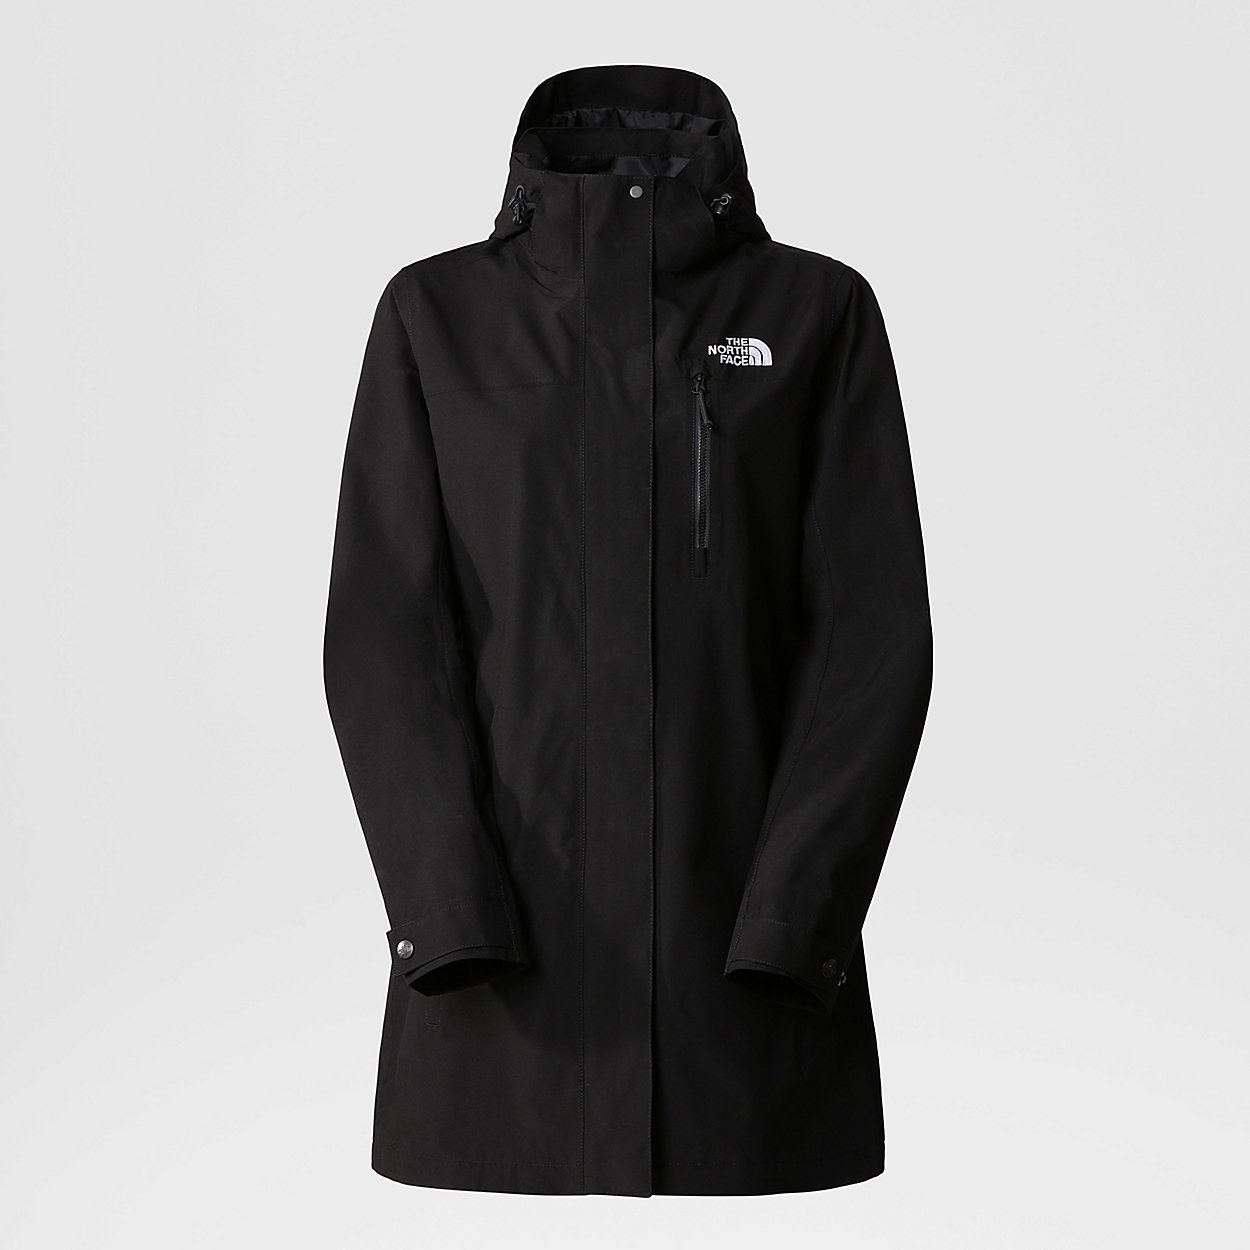 Unlock Wilderness' choice in the Berghaus Vs North Face comparison, the Waterproof Parka by The North Face